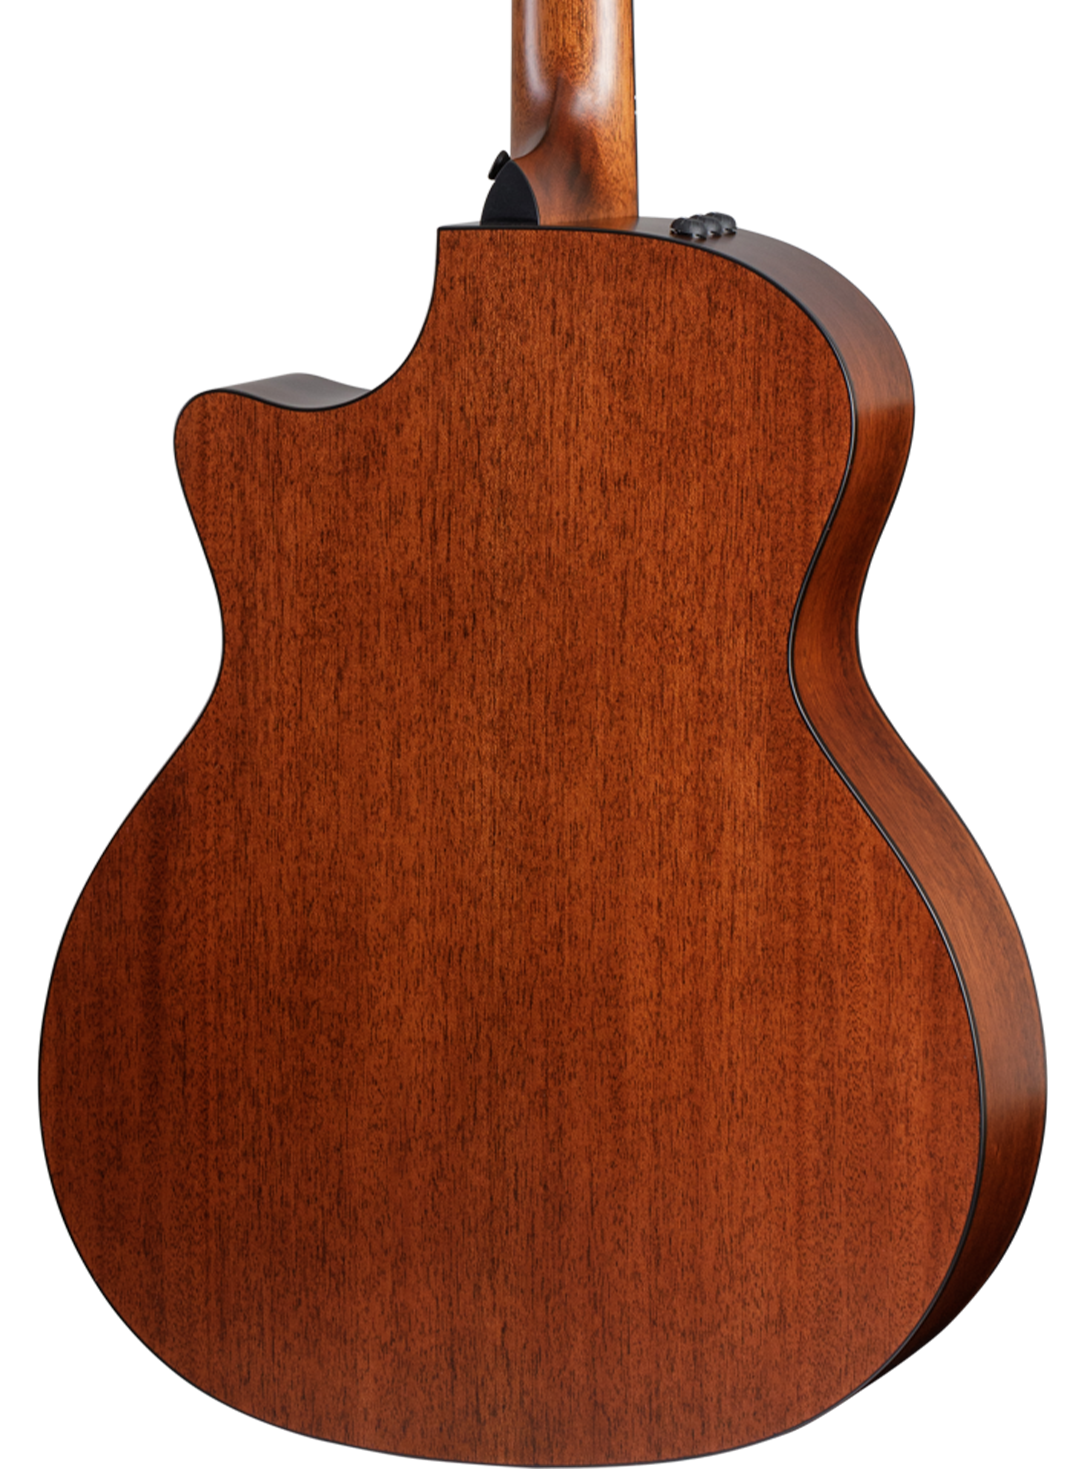 https://www.taylorguitars.com/sites/default/files/styles/full_image/public/images/2022-11/taylor-features-back-woods-mahogany-324ce.png?itok=NS0yB4JA